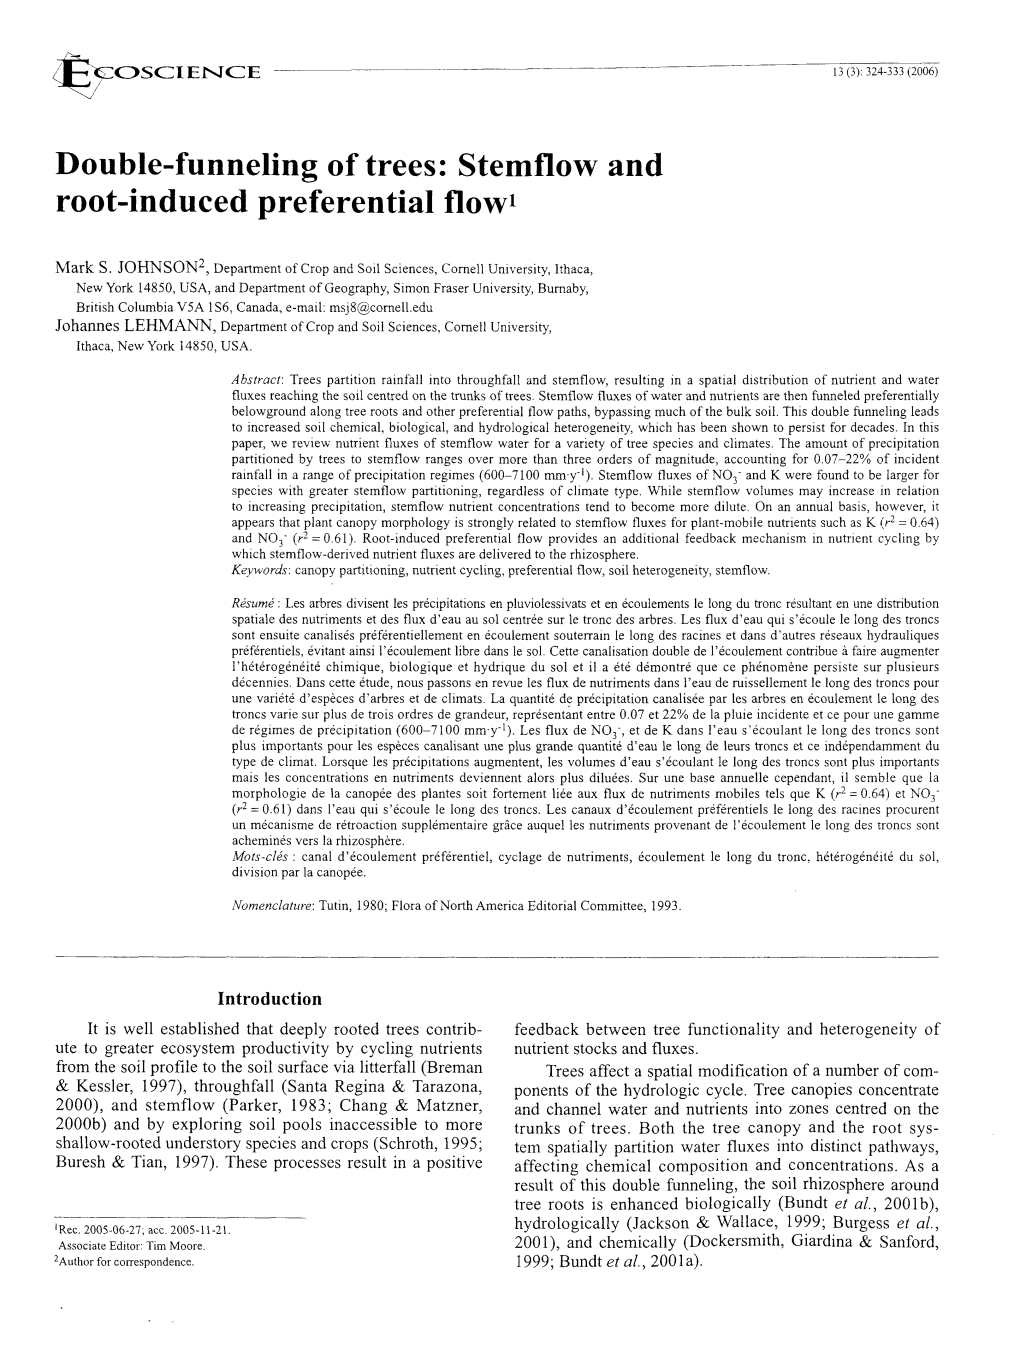 Double-Funneling of Trees: Stemflow and Root-Induced Preferential Flow1